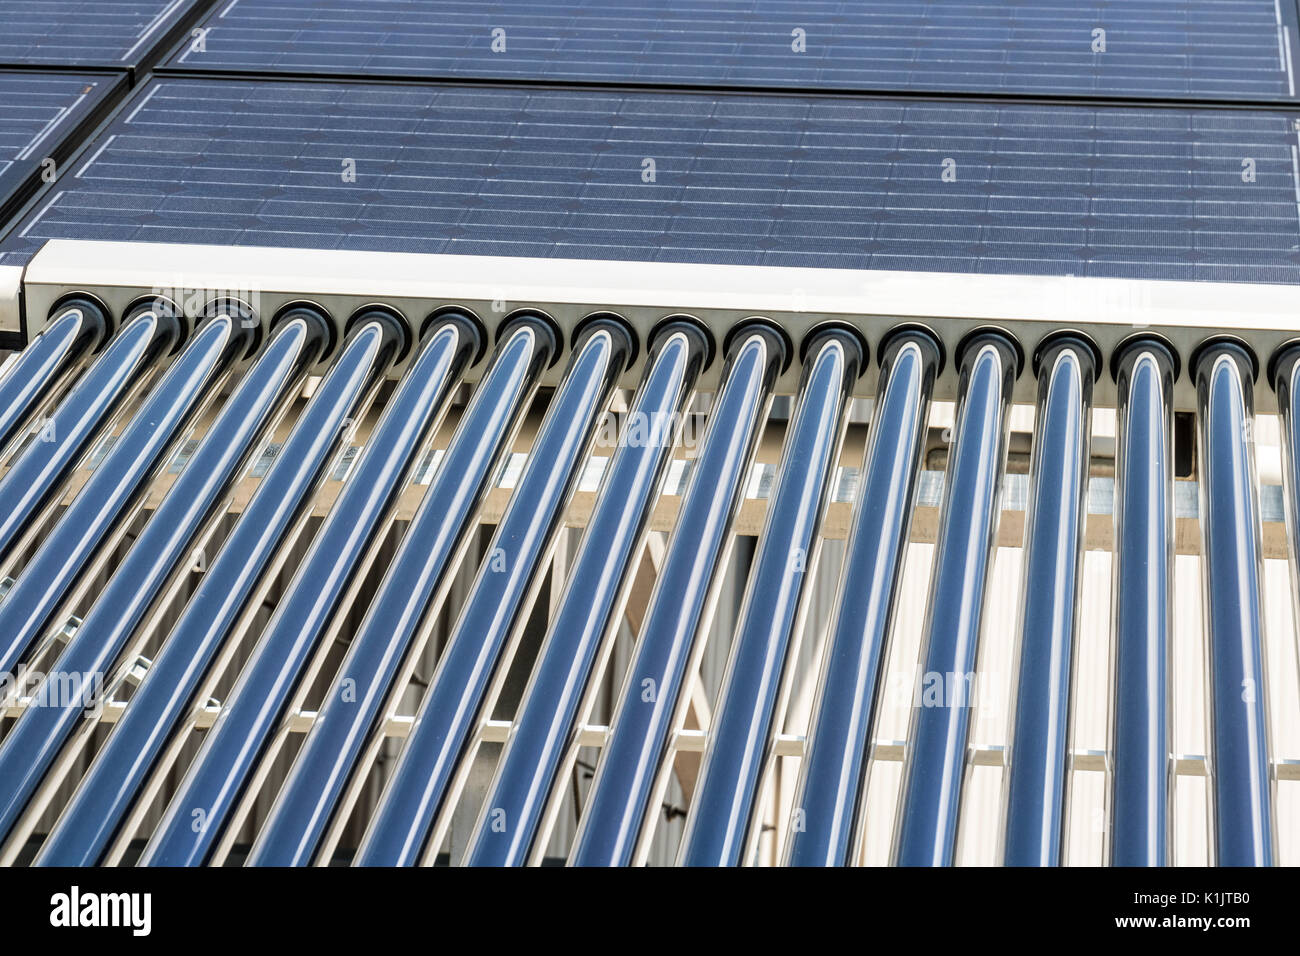 Solar Thermal Flat Panels with Evacuated Tube Collectors. Many companies are installing renewable energy sources to reduce their carbon footprint II Stock Photo